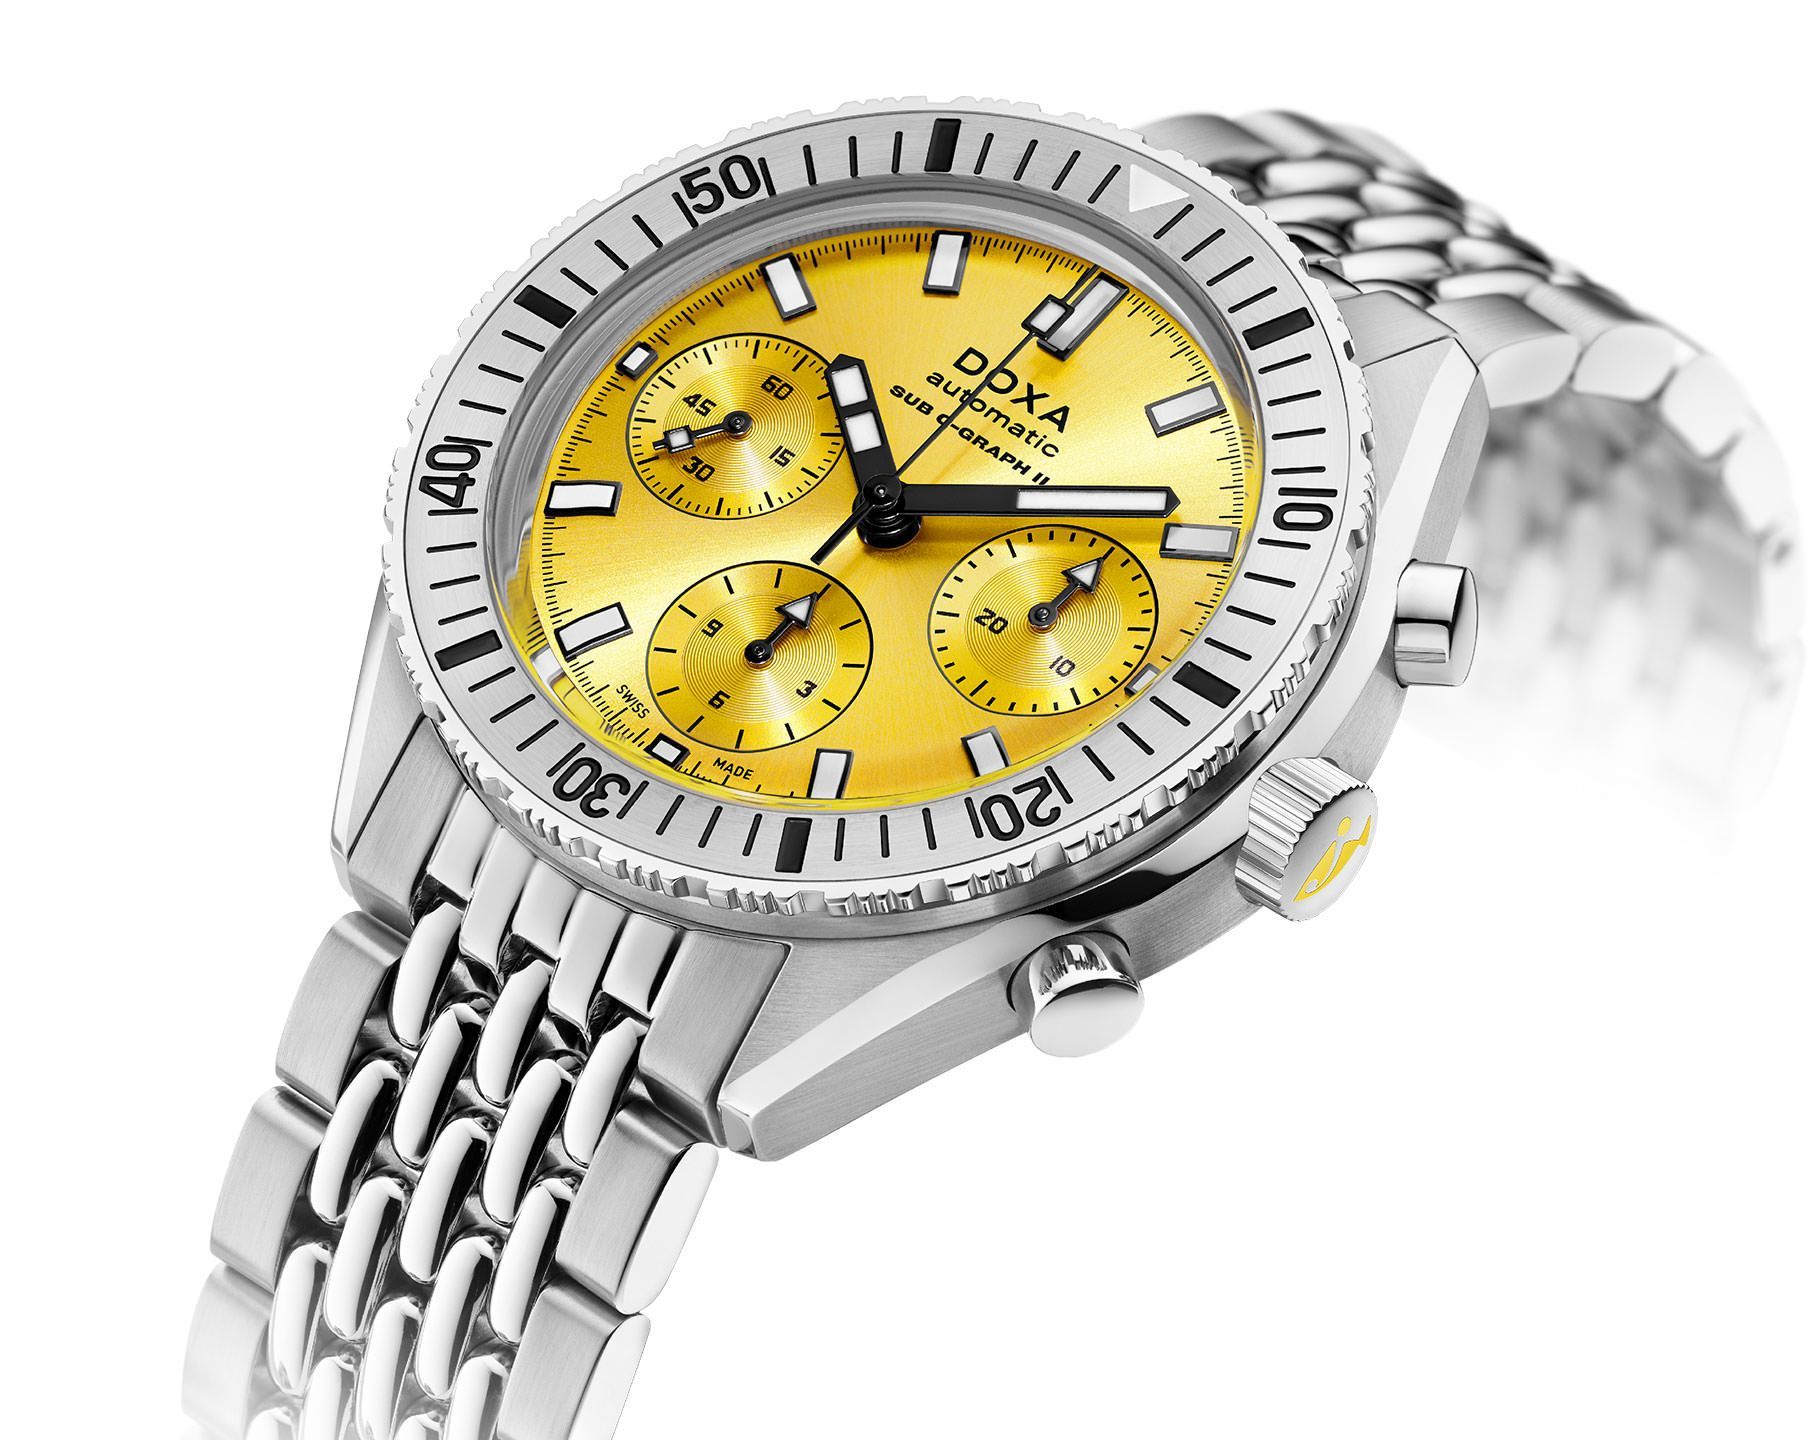 Doxa SUB 200 C-GRAPH II Divingstar Yellow Dial 42 mm Automatic Watch For Men - 2